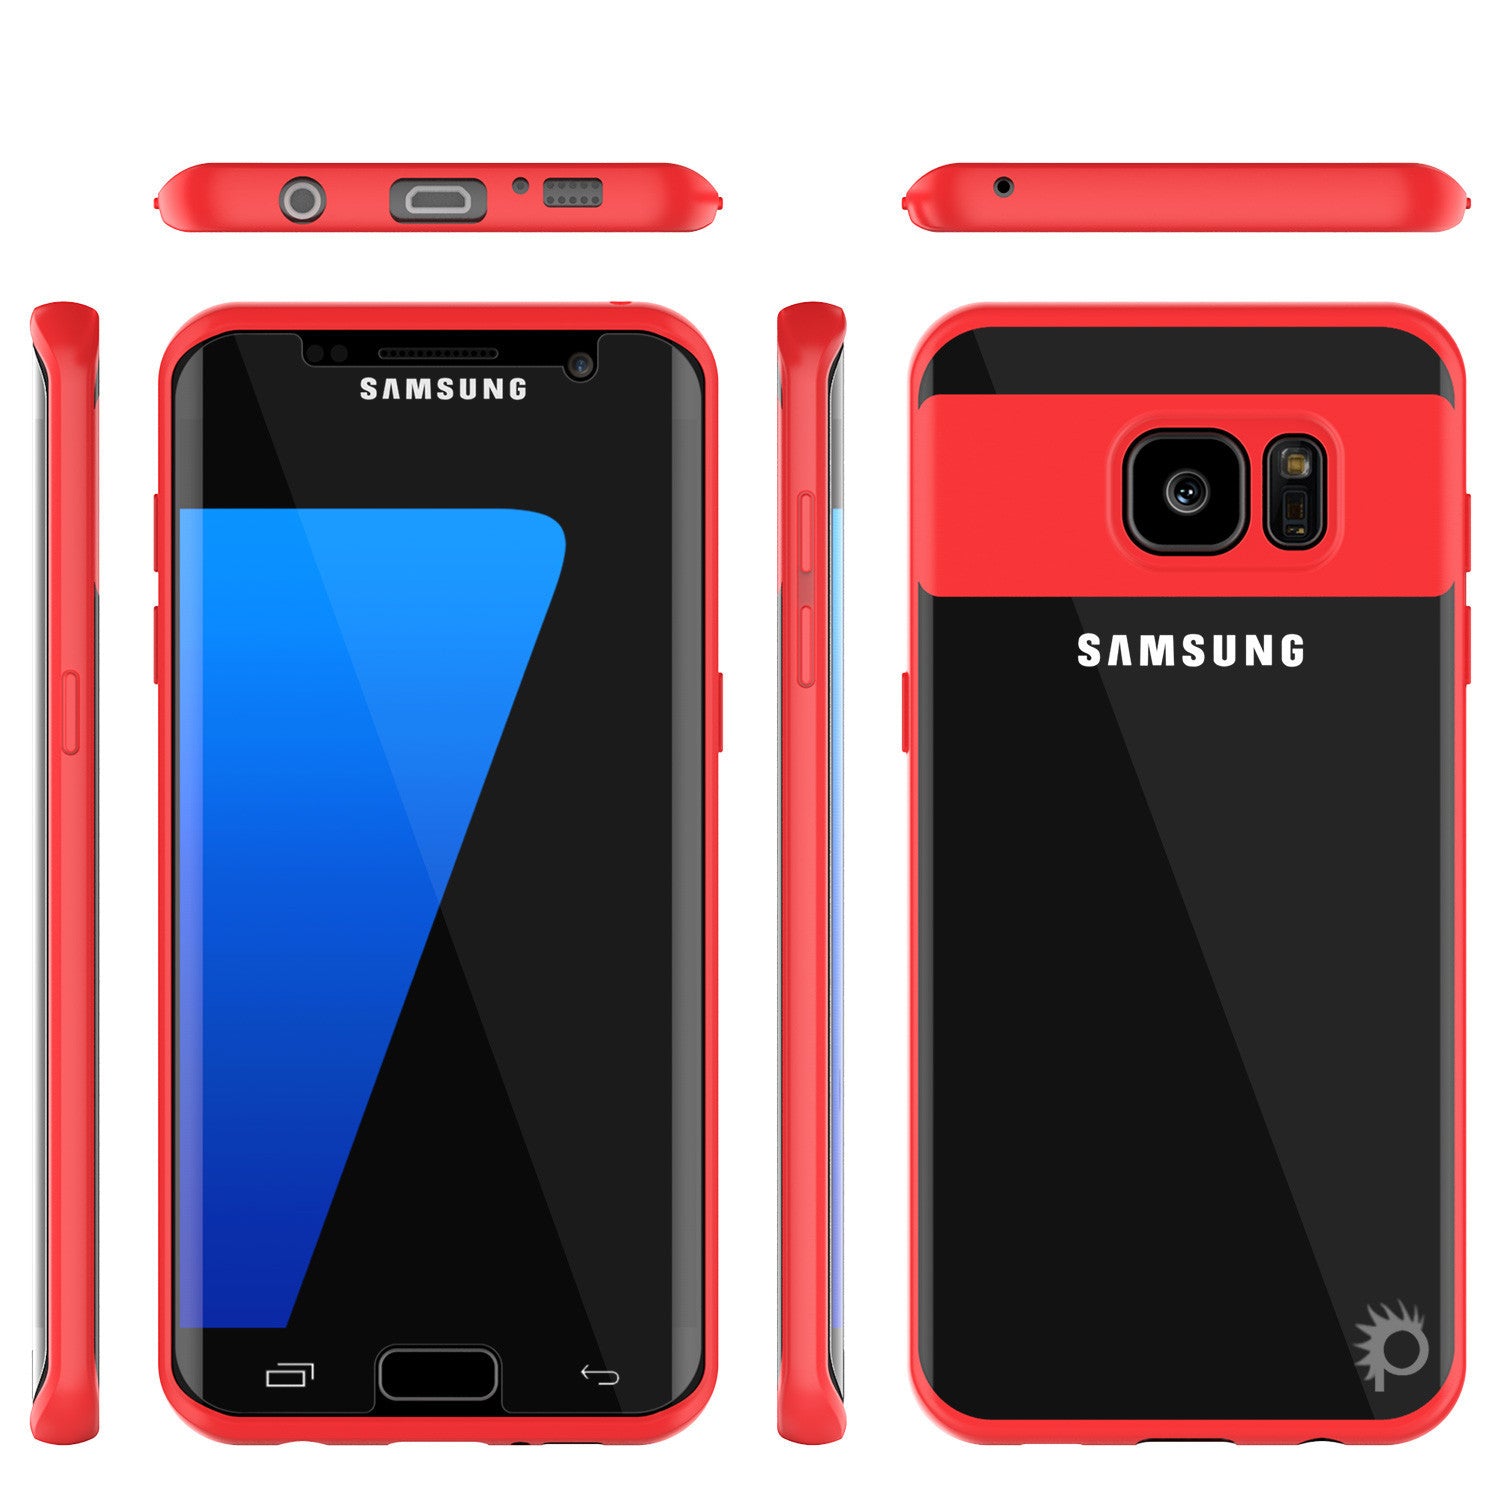 Galaxy S7 Edge Case [Mask Series] [Red] Full Body Hybrid Dual Layer Tpu Cover W/ Protective Punkshield Screen Protector